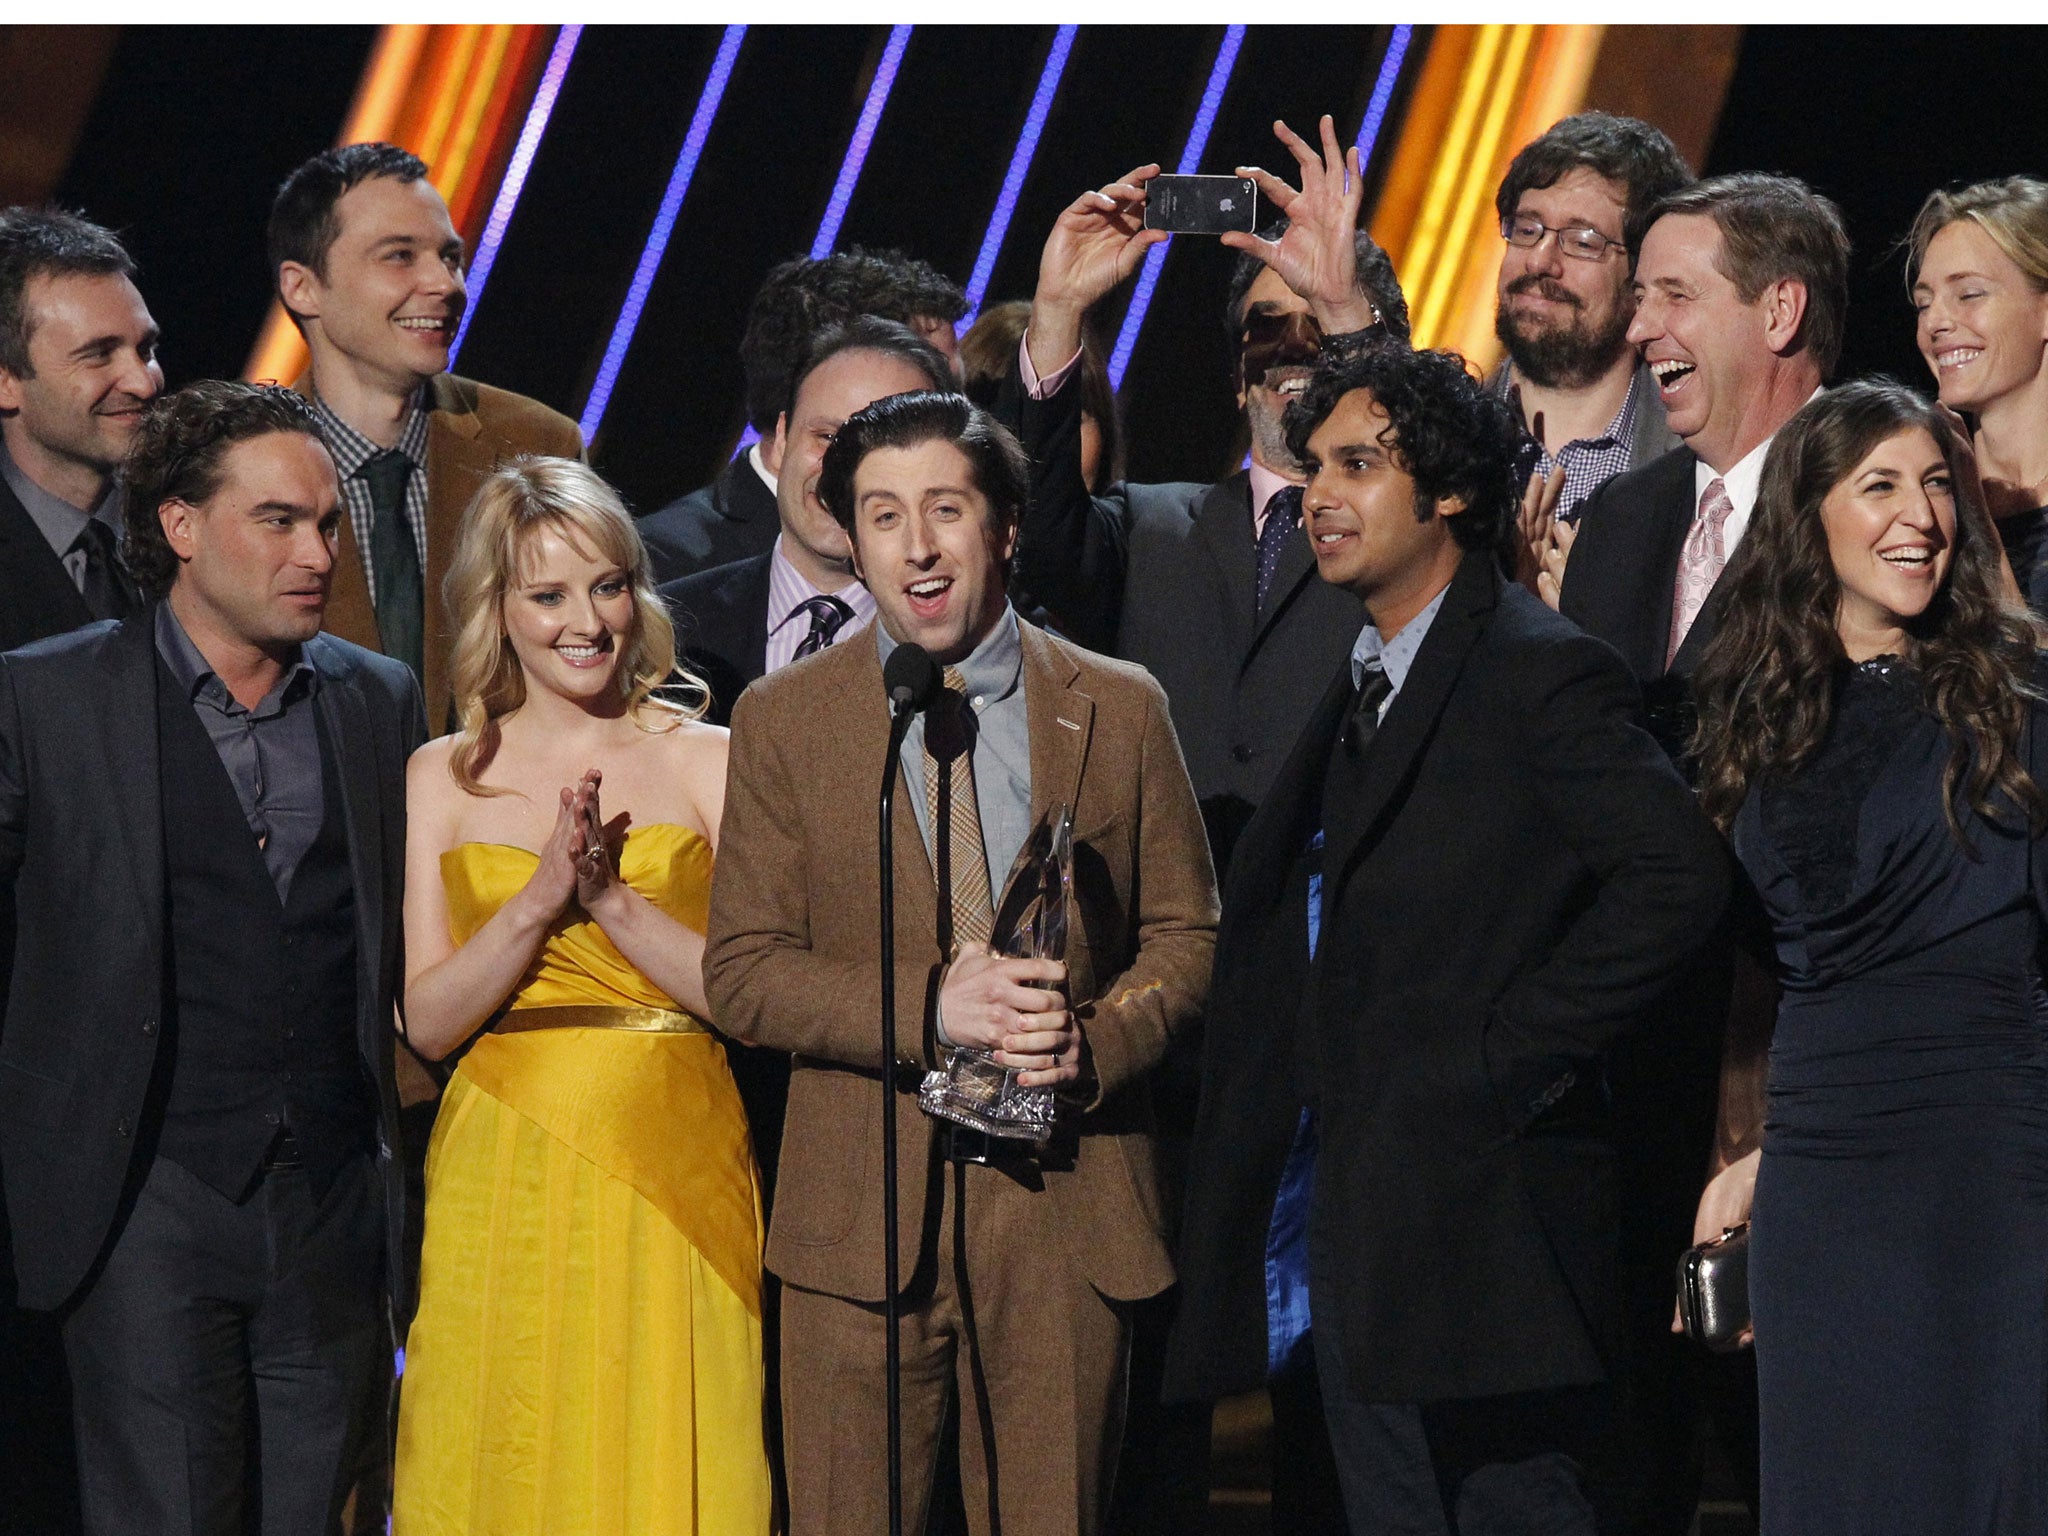 The cast of 'The Big Bang Theory' accept the award for Favorite Network TV Comedy at the 2013 People's Choice Awards in Los Angeles